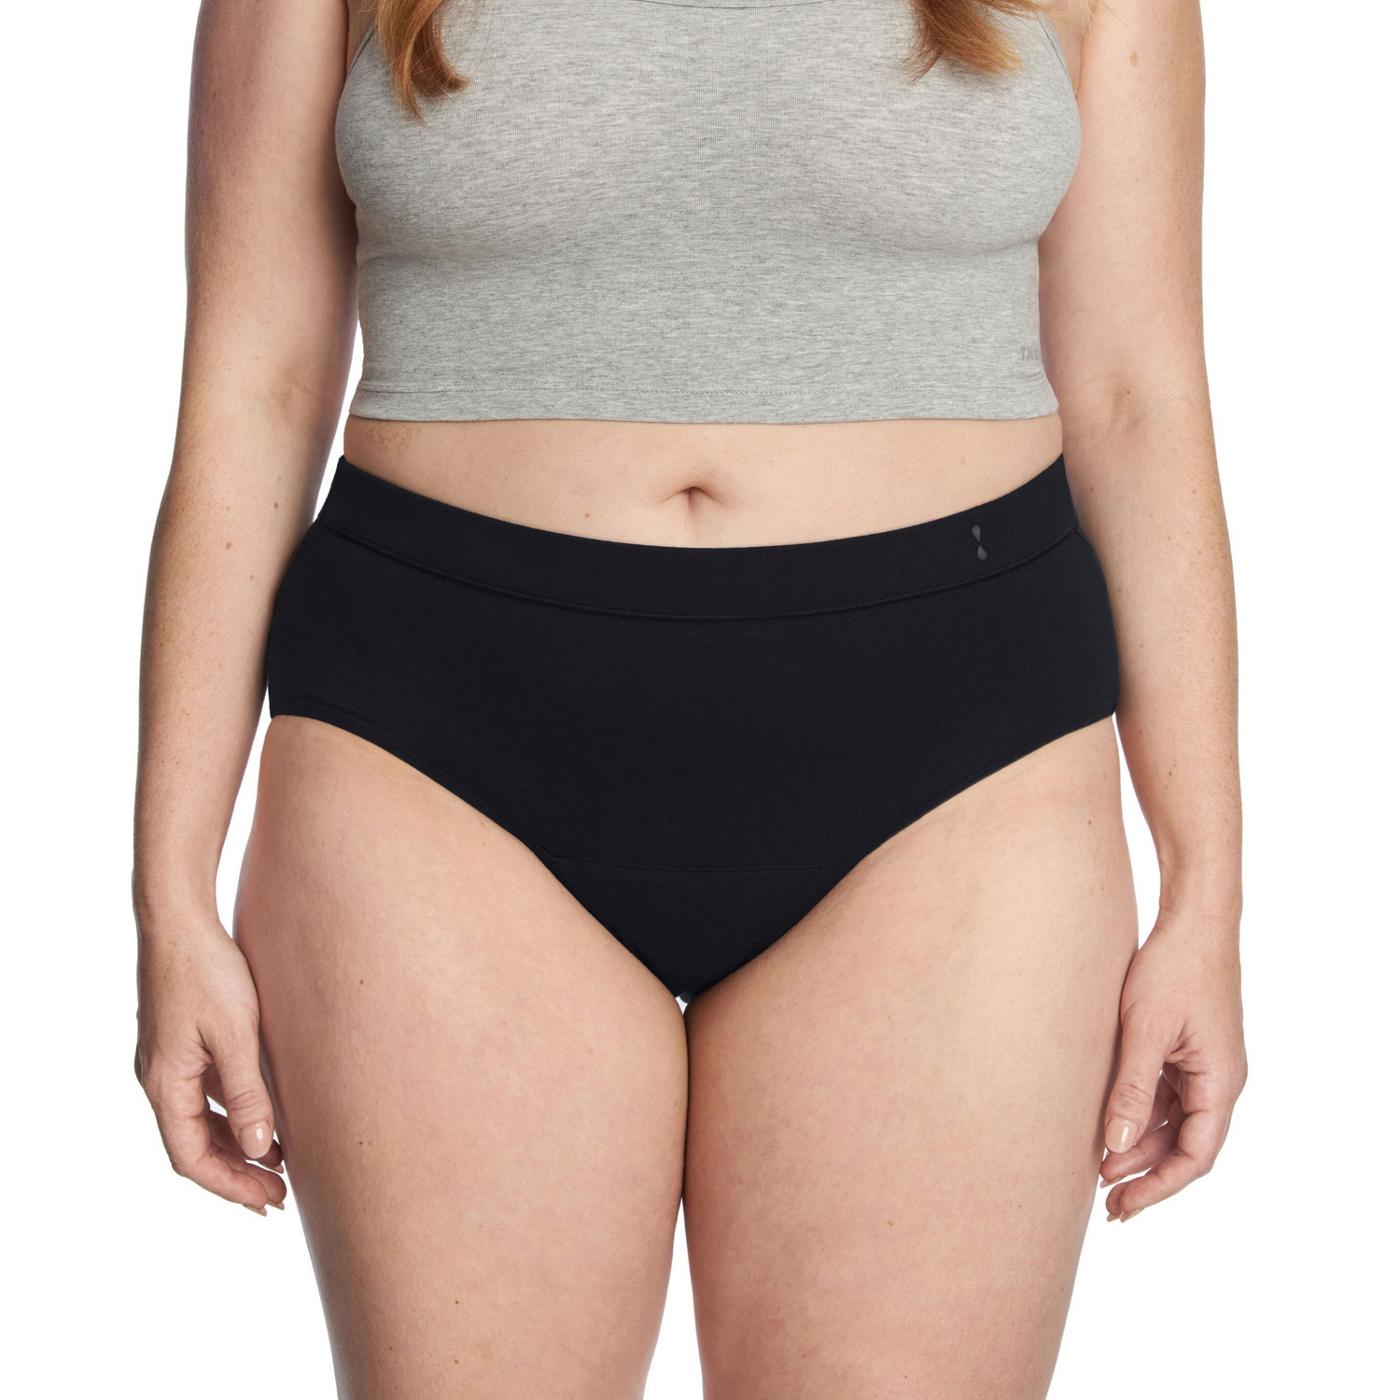 Thinx For All Women's Super Absorbency Cotton Brief Period Underwear, Size  Large, Black - 1 ea